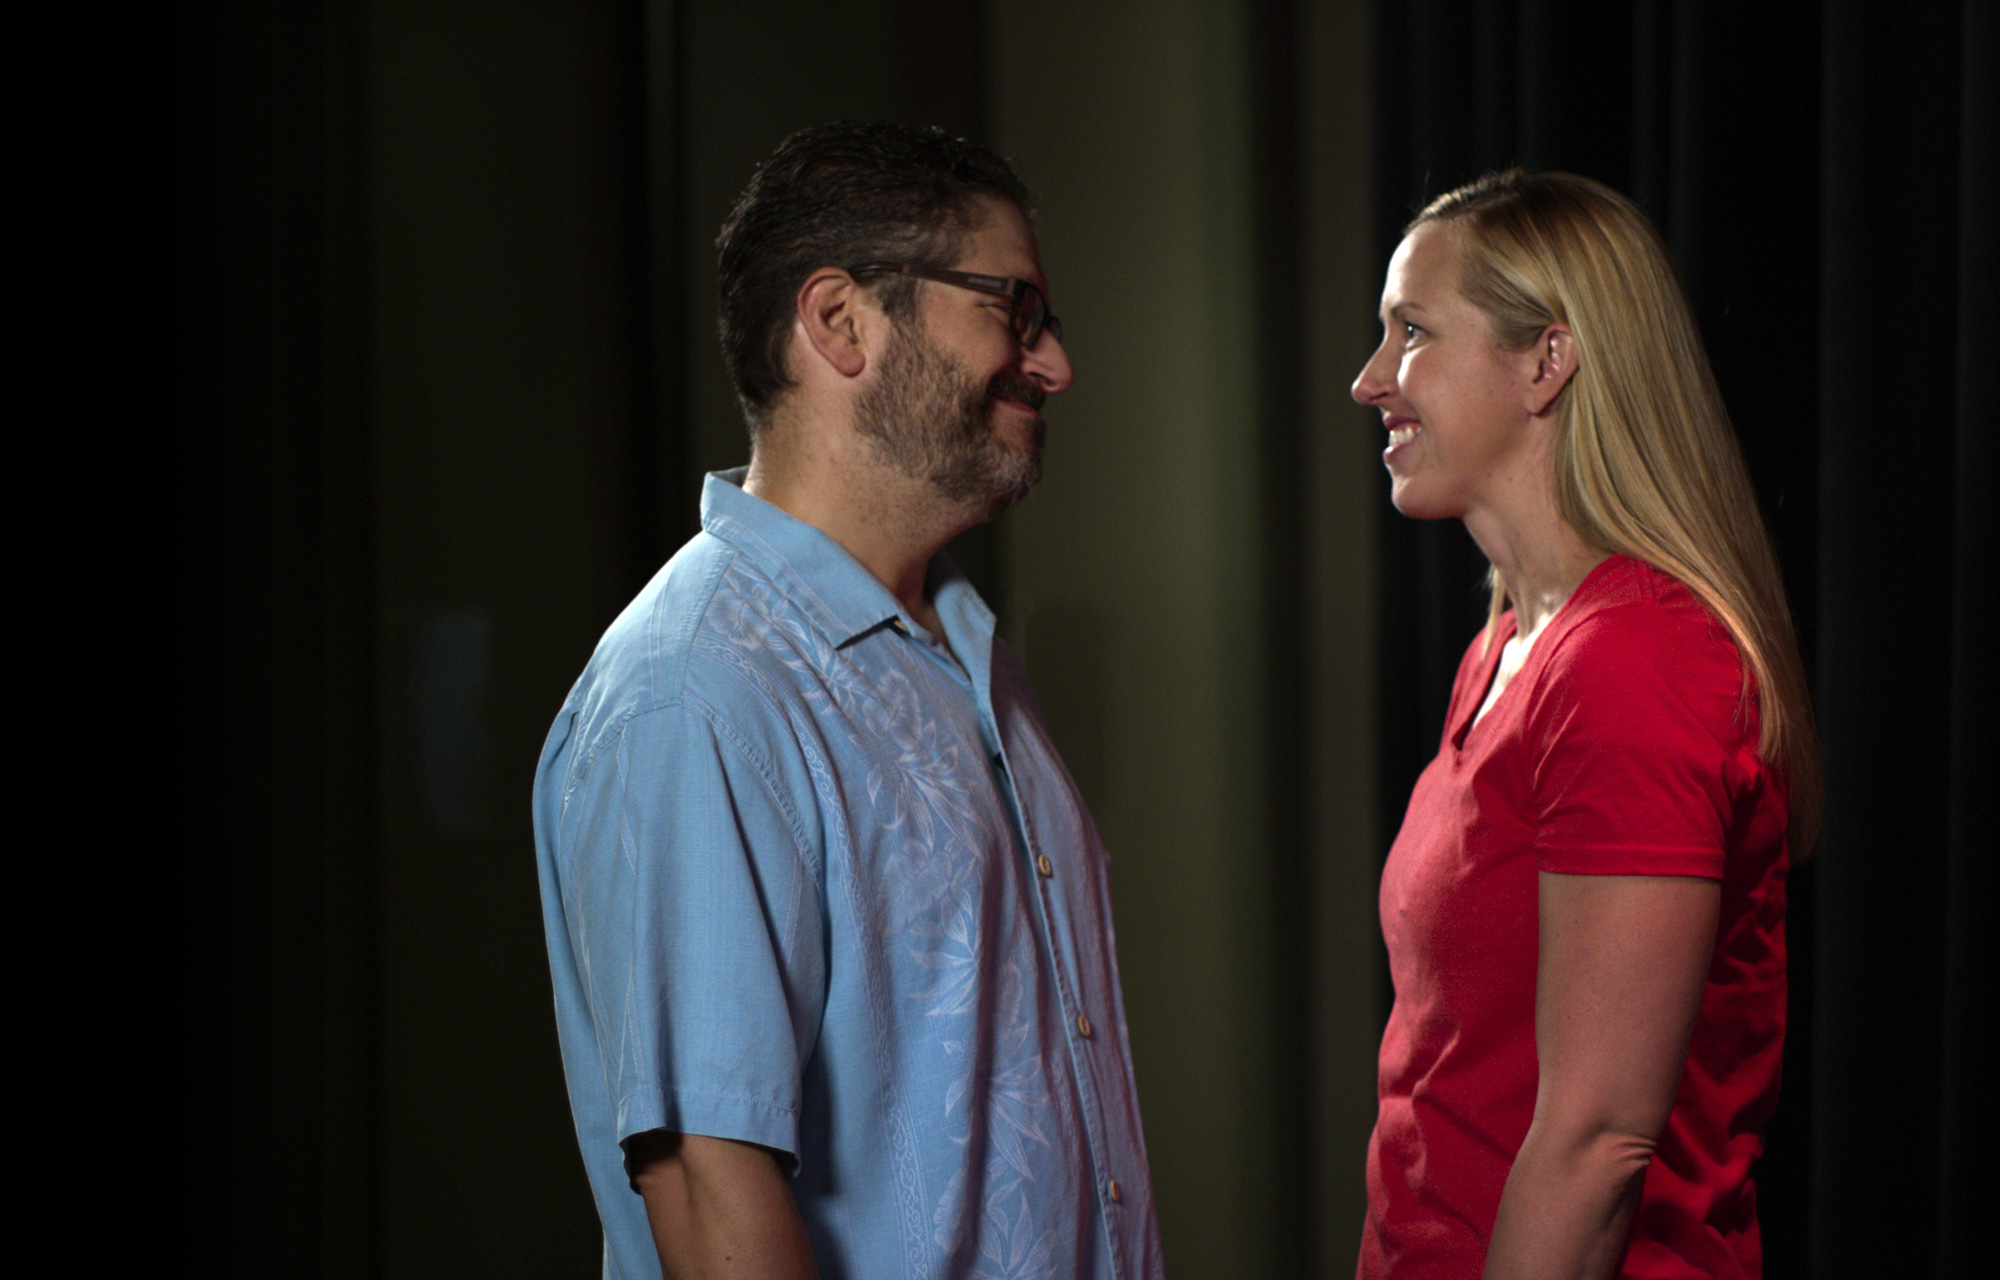 Still from a movie showing a man and woman smiling at each other backstage